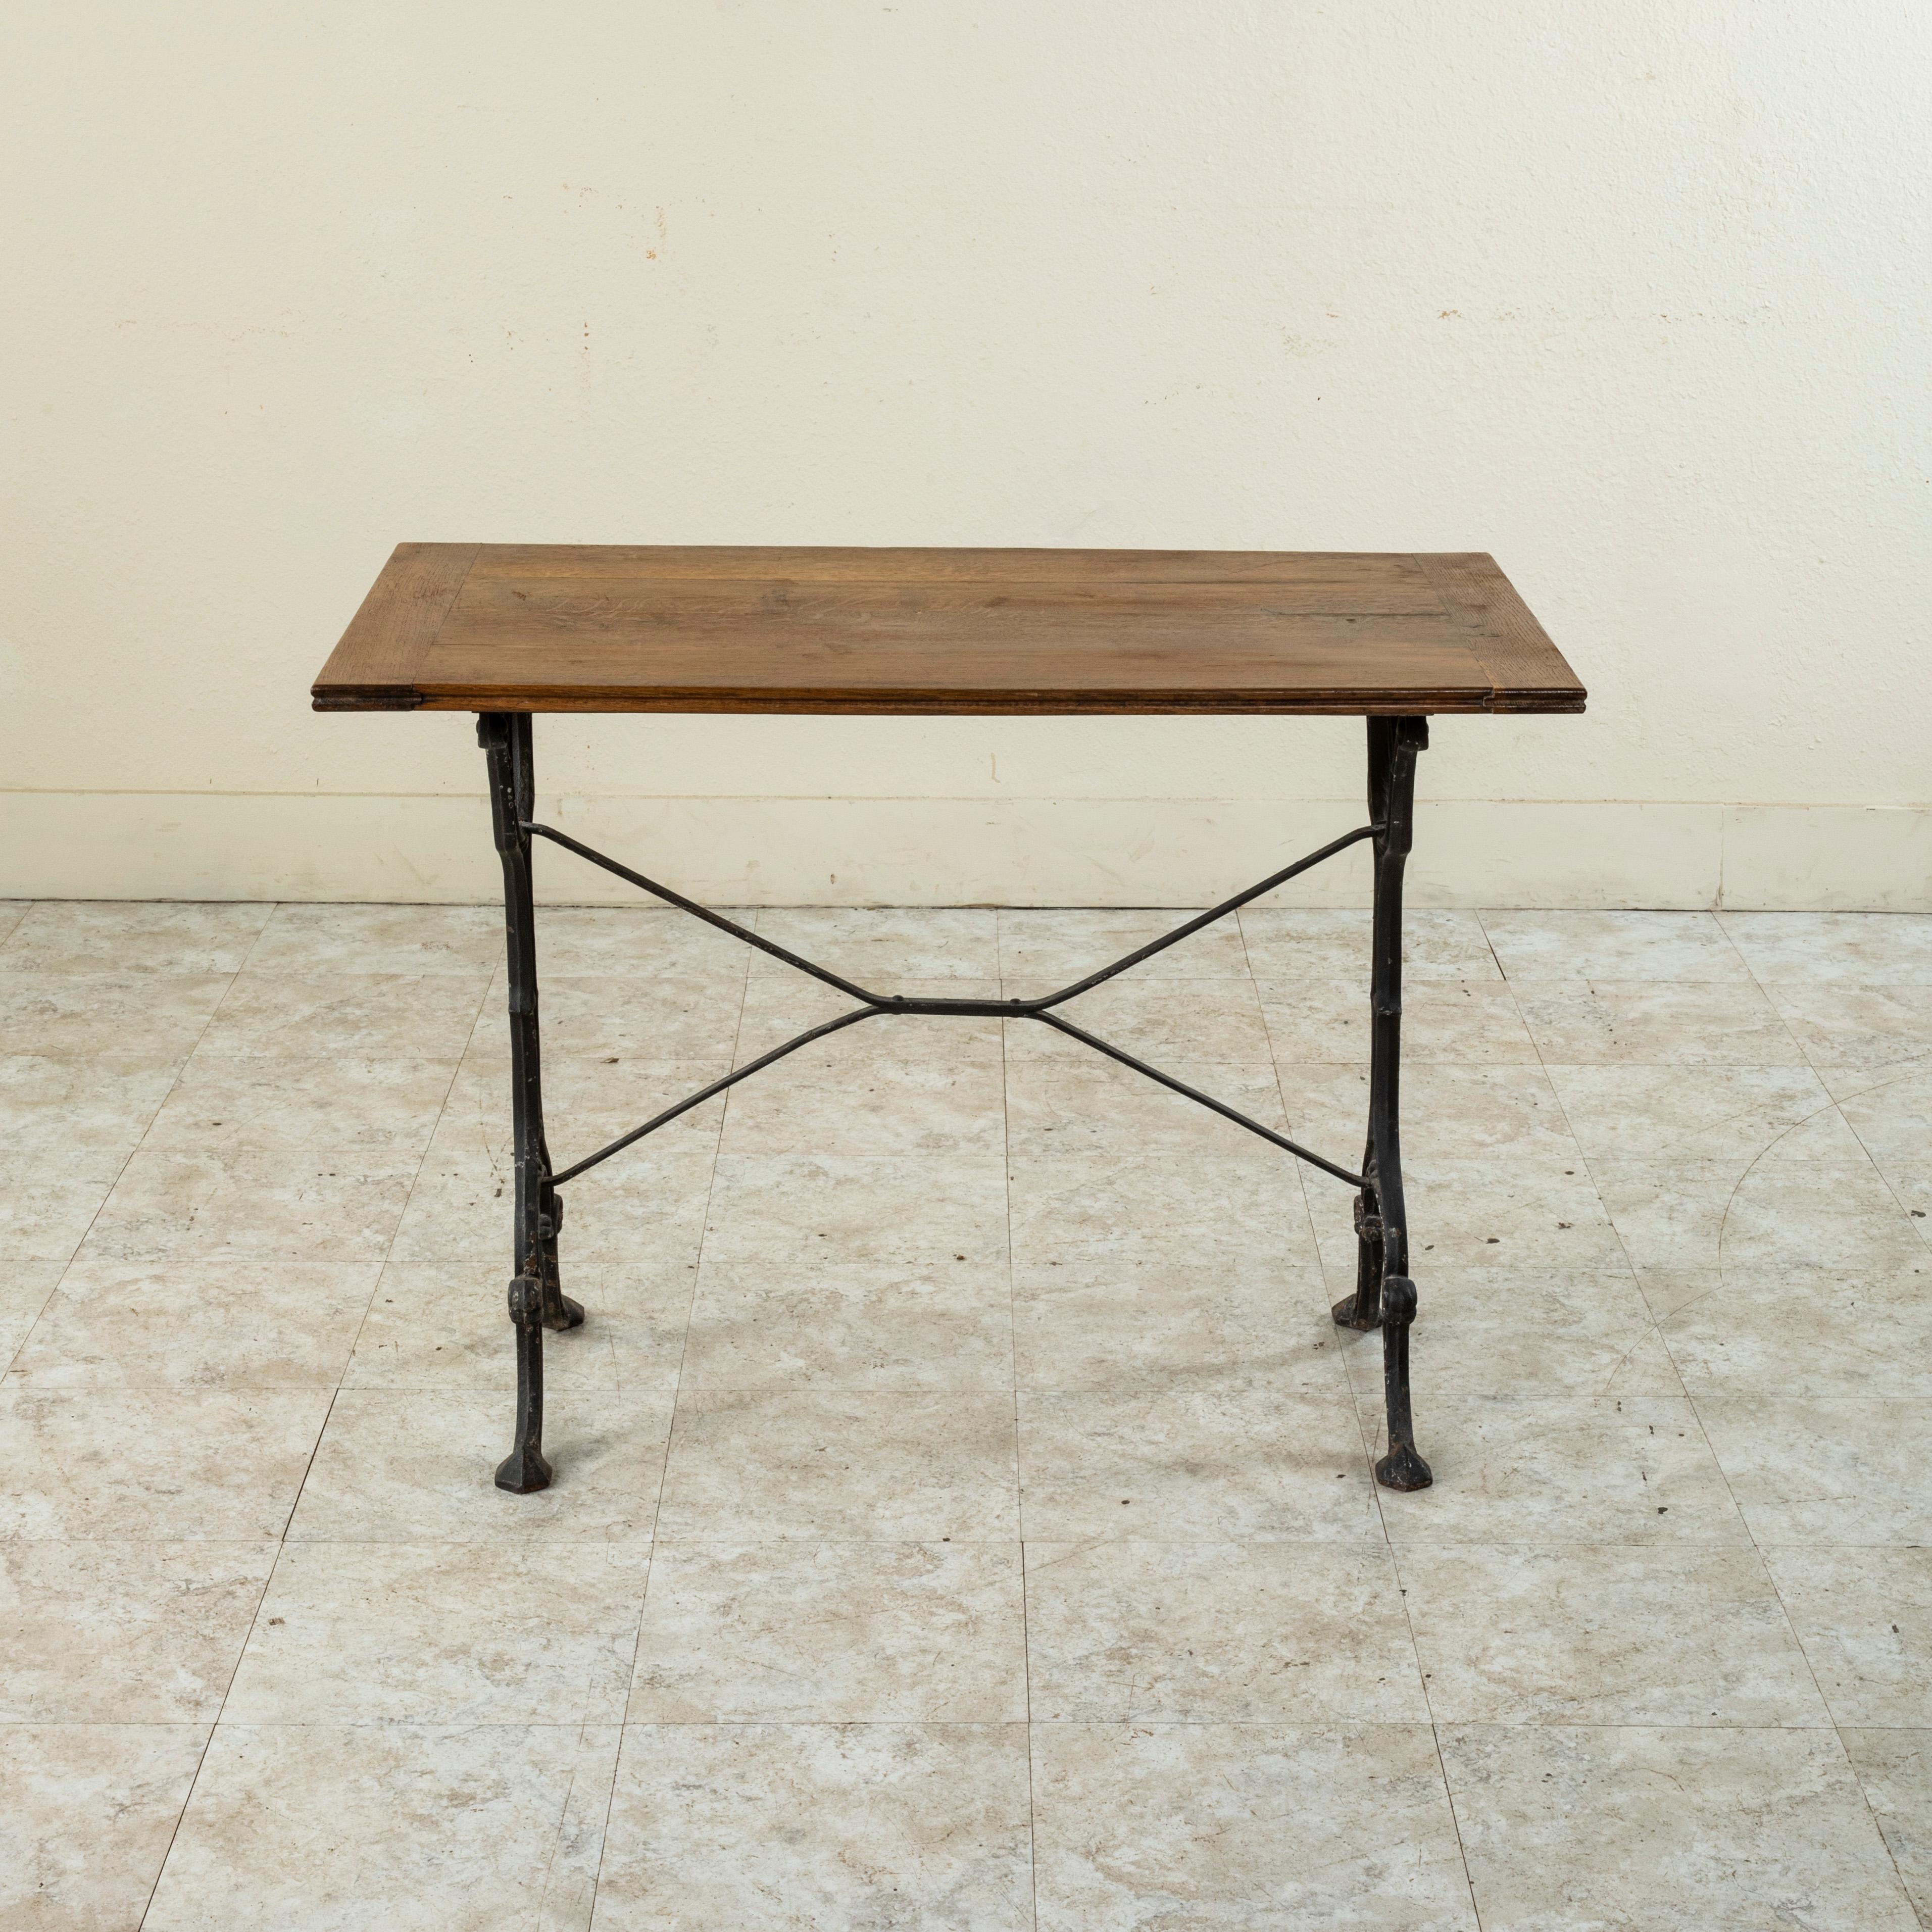 Originally used in a French brasserie during the Mid-20th Century, this cast iron bistro table or cafe table features a beveled oak top. Scrolled iron legs support the top and are joined by an X-stretcher that provides additional stability to the